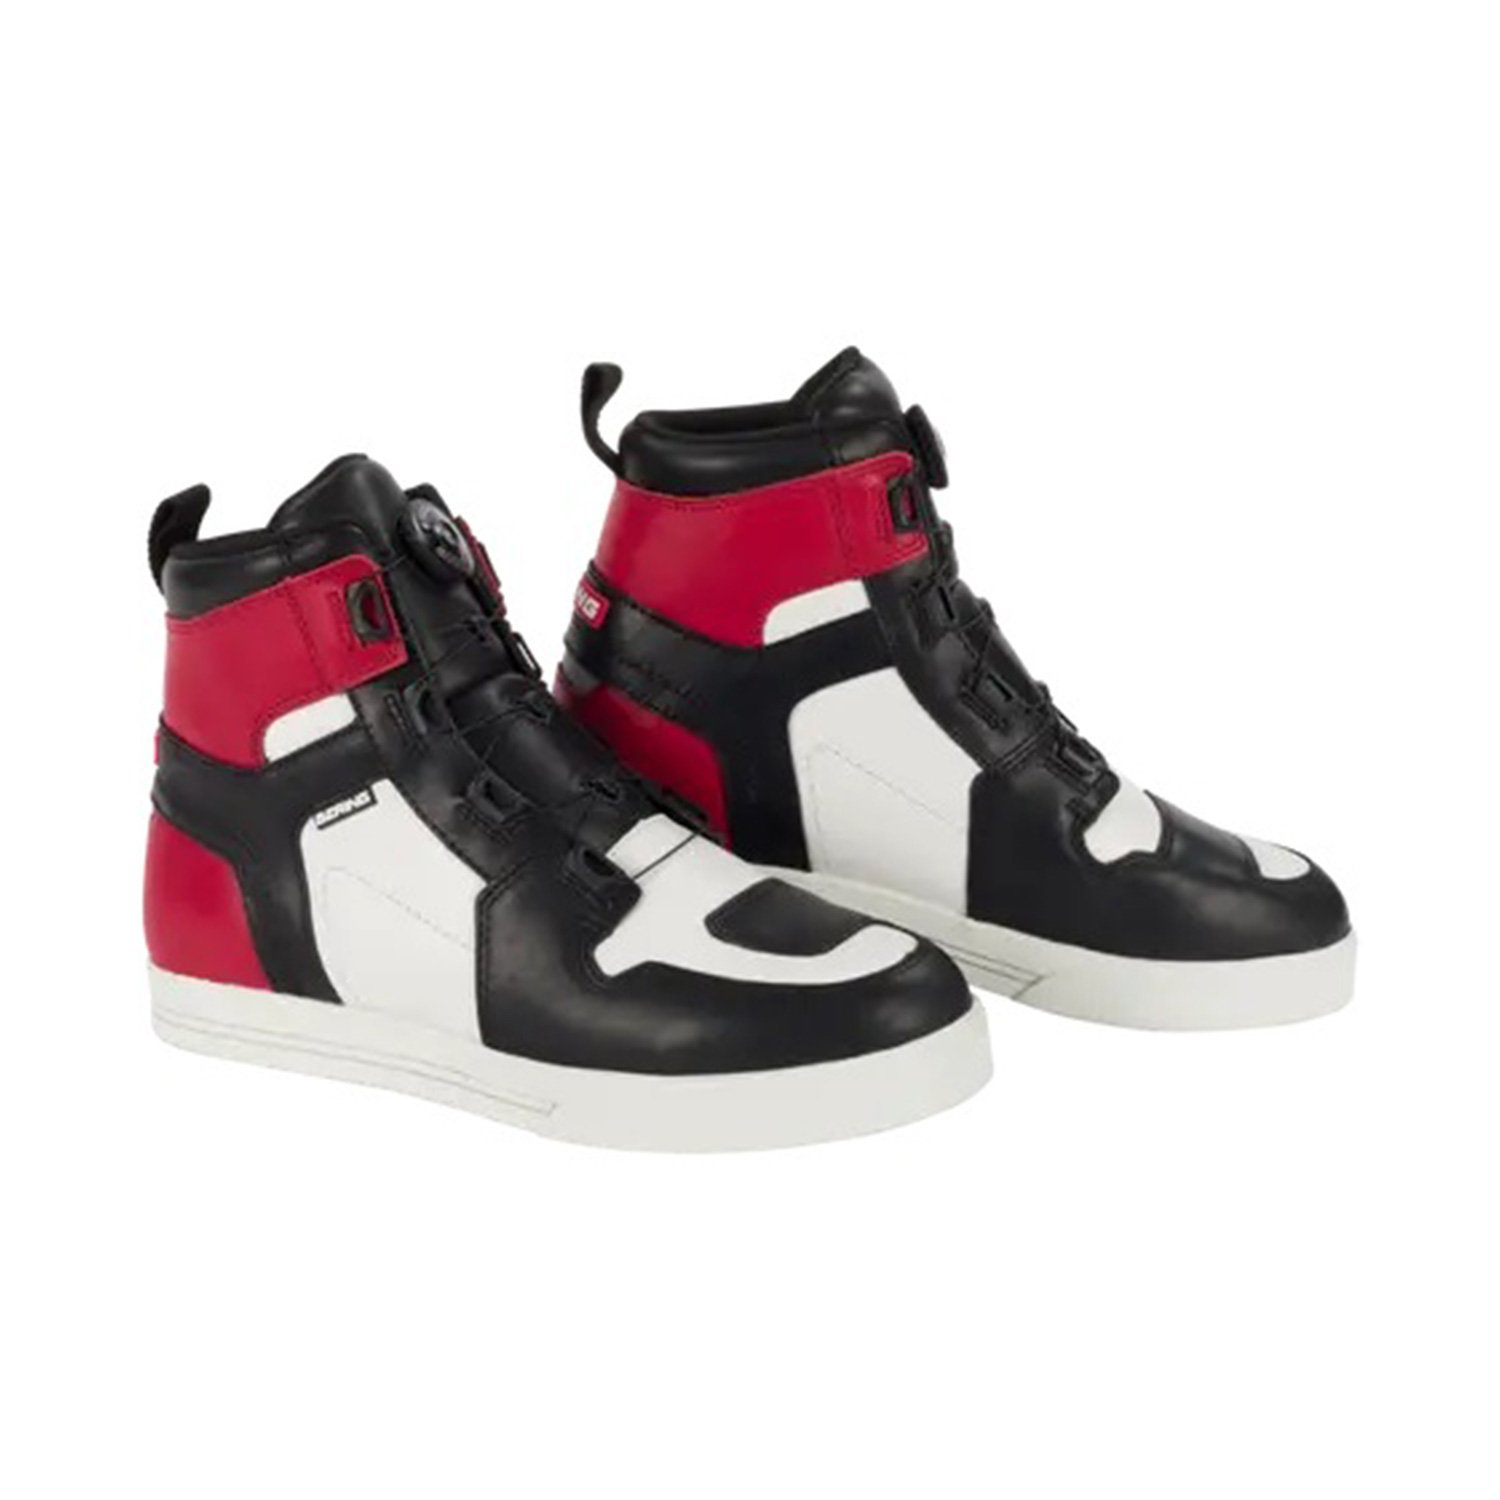 Image of Bering Sneakers Reflex A-Top Black White Red Talla 46